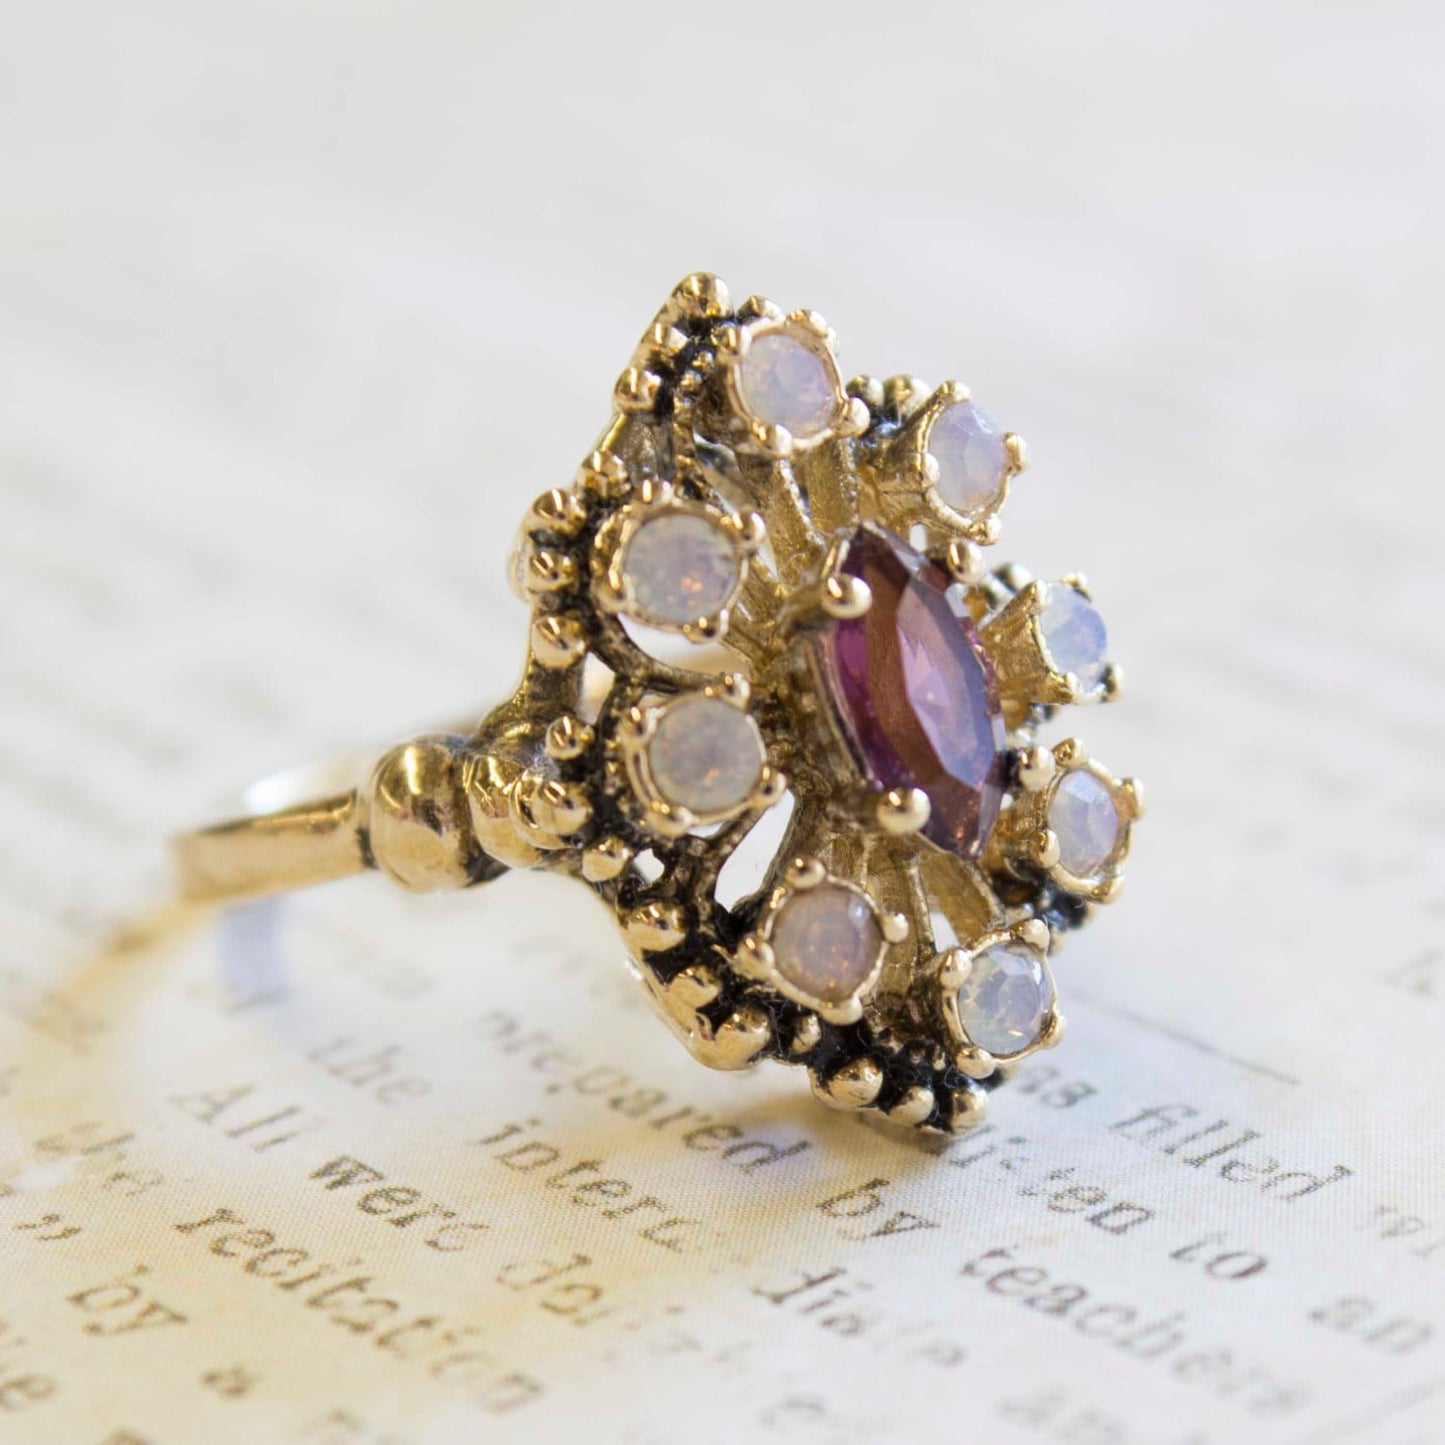 Vintage Ring Filigree Cocktail Ring Amethyst Swarovski Crystals and Pinfire Opals Antique Womans 18k Gold  #R250